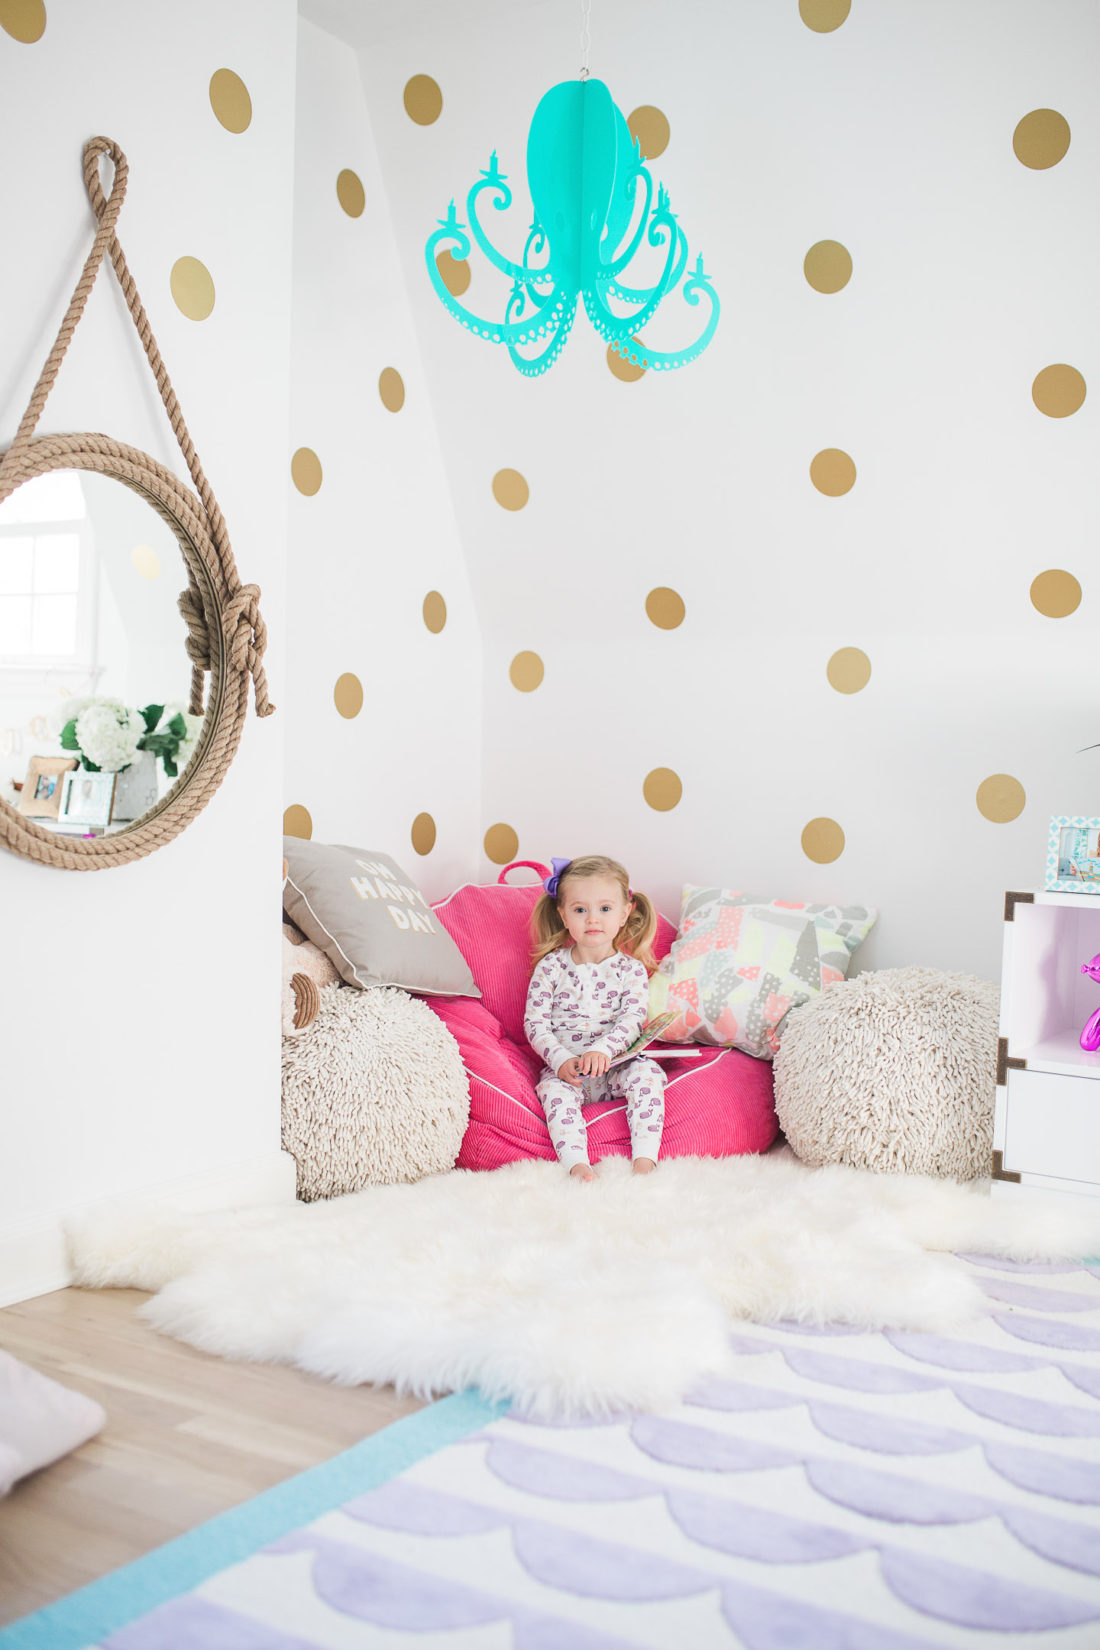 Marlowe Martino pictured in her bedroom designed by mother Eva Amurri Martino of lifestyle and motherhood blog Happily Eva After